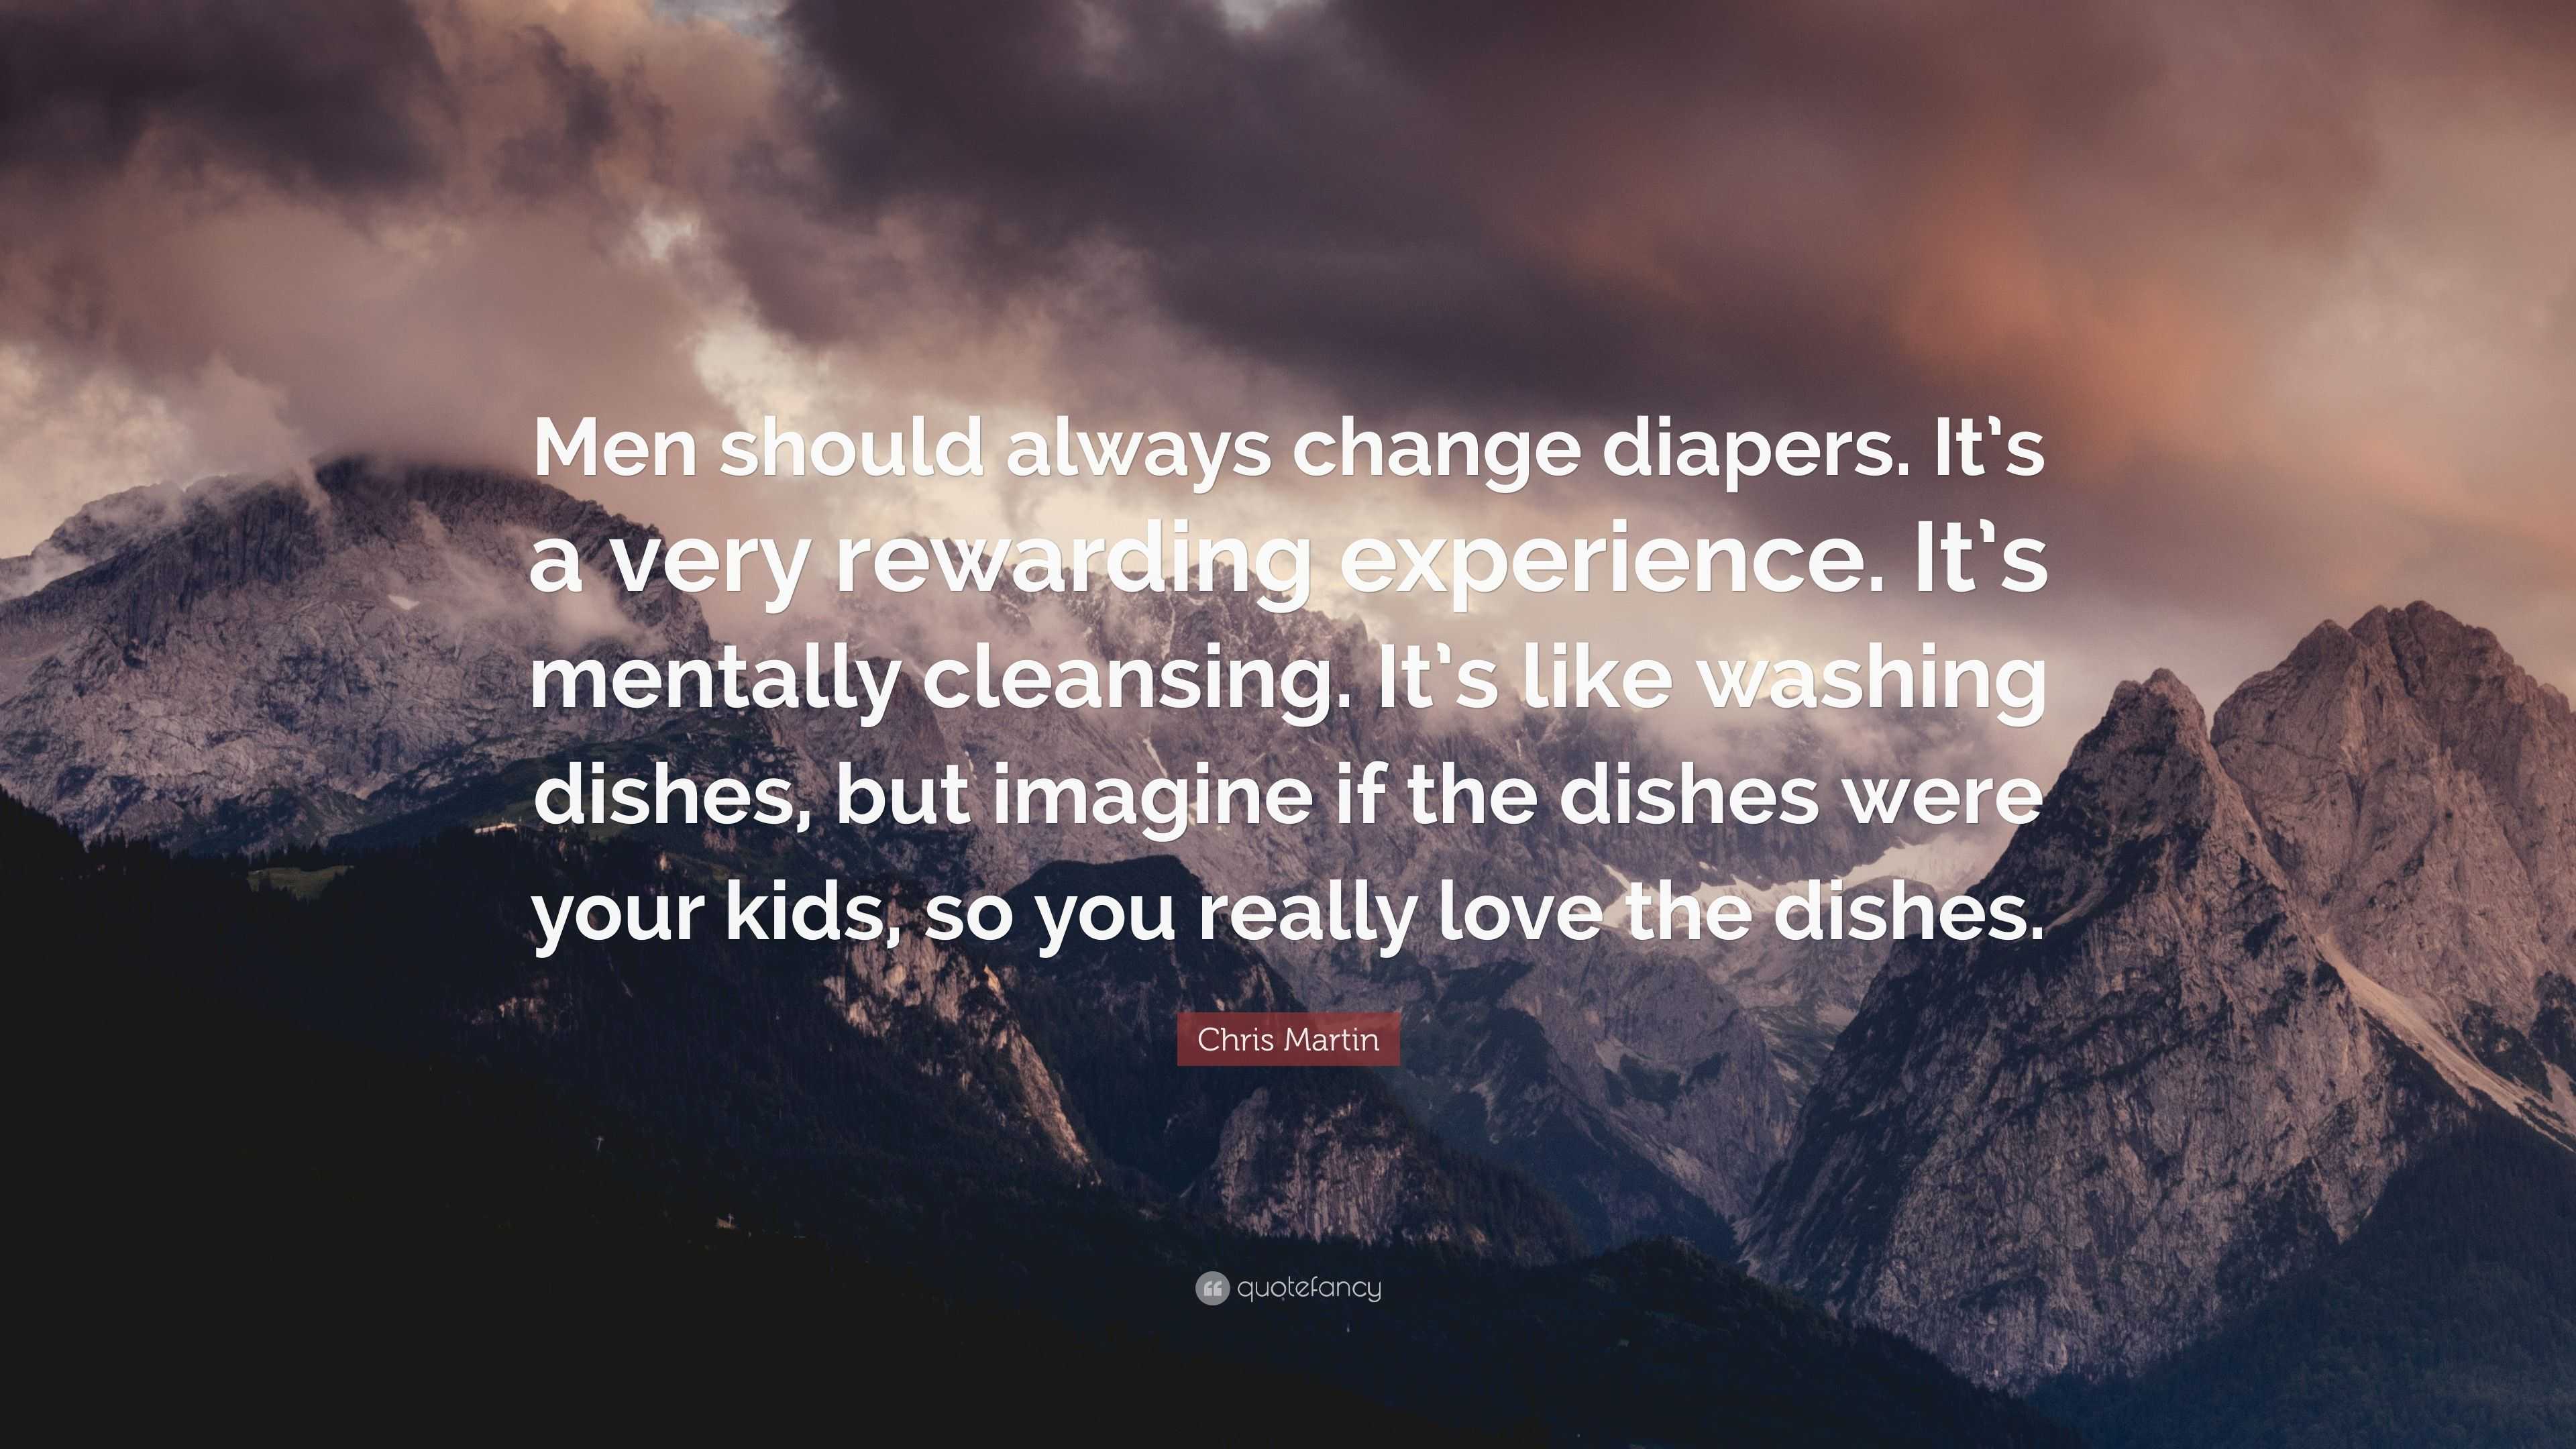 Chris Martin Quote: “Men should always change diapers. It's a very  rewarding experience. It's mentally cleansing. It's like washing dishes,  b”